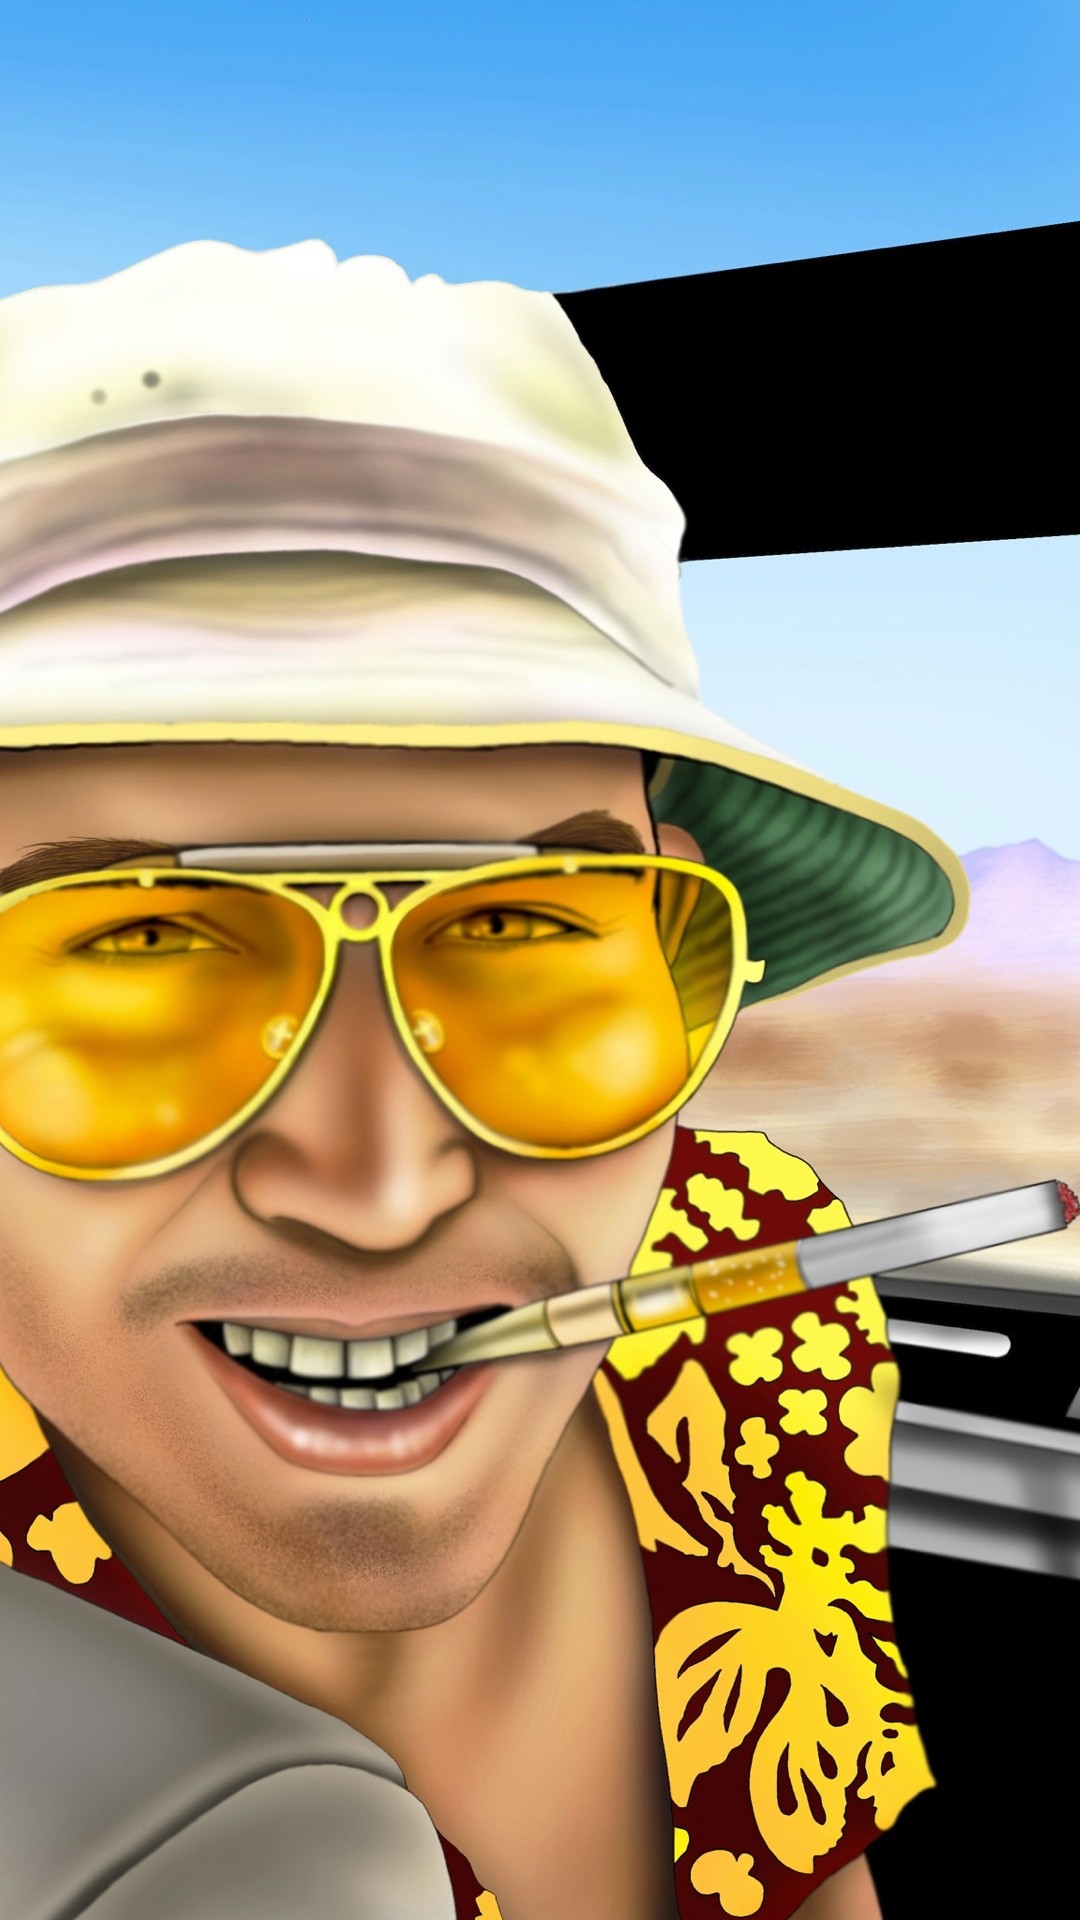 1080x1920 Download the Android Fear and Loathing wallpaper